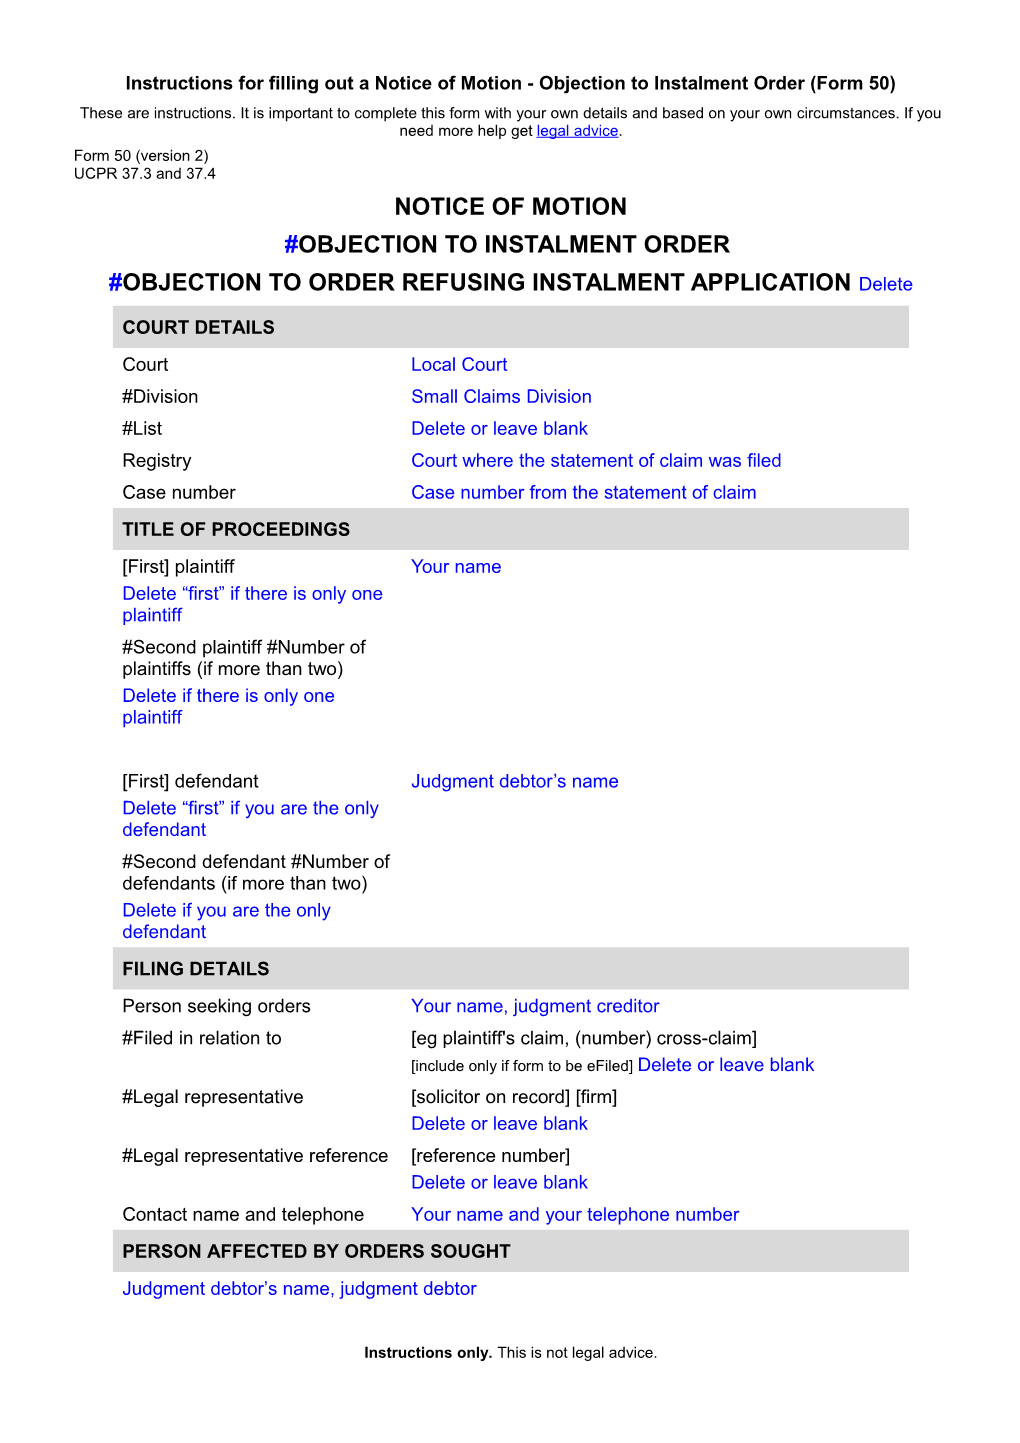 NSW UCPR Form 50 - Notice of Motion Objection to Instalment Order Or Order Refusing Instalment